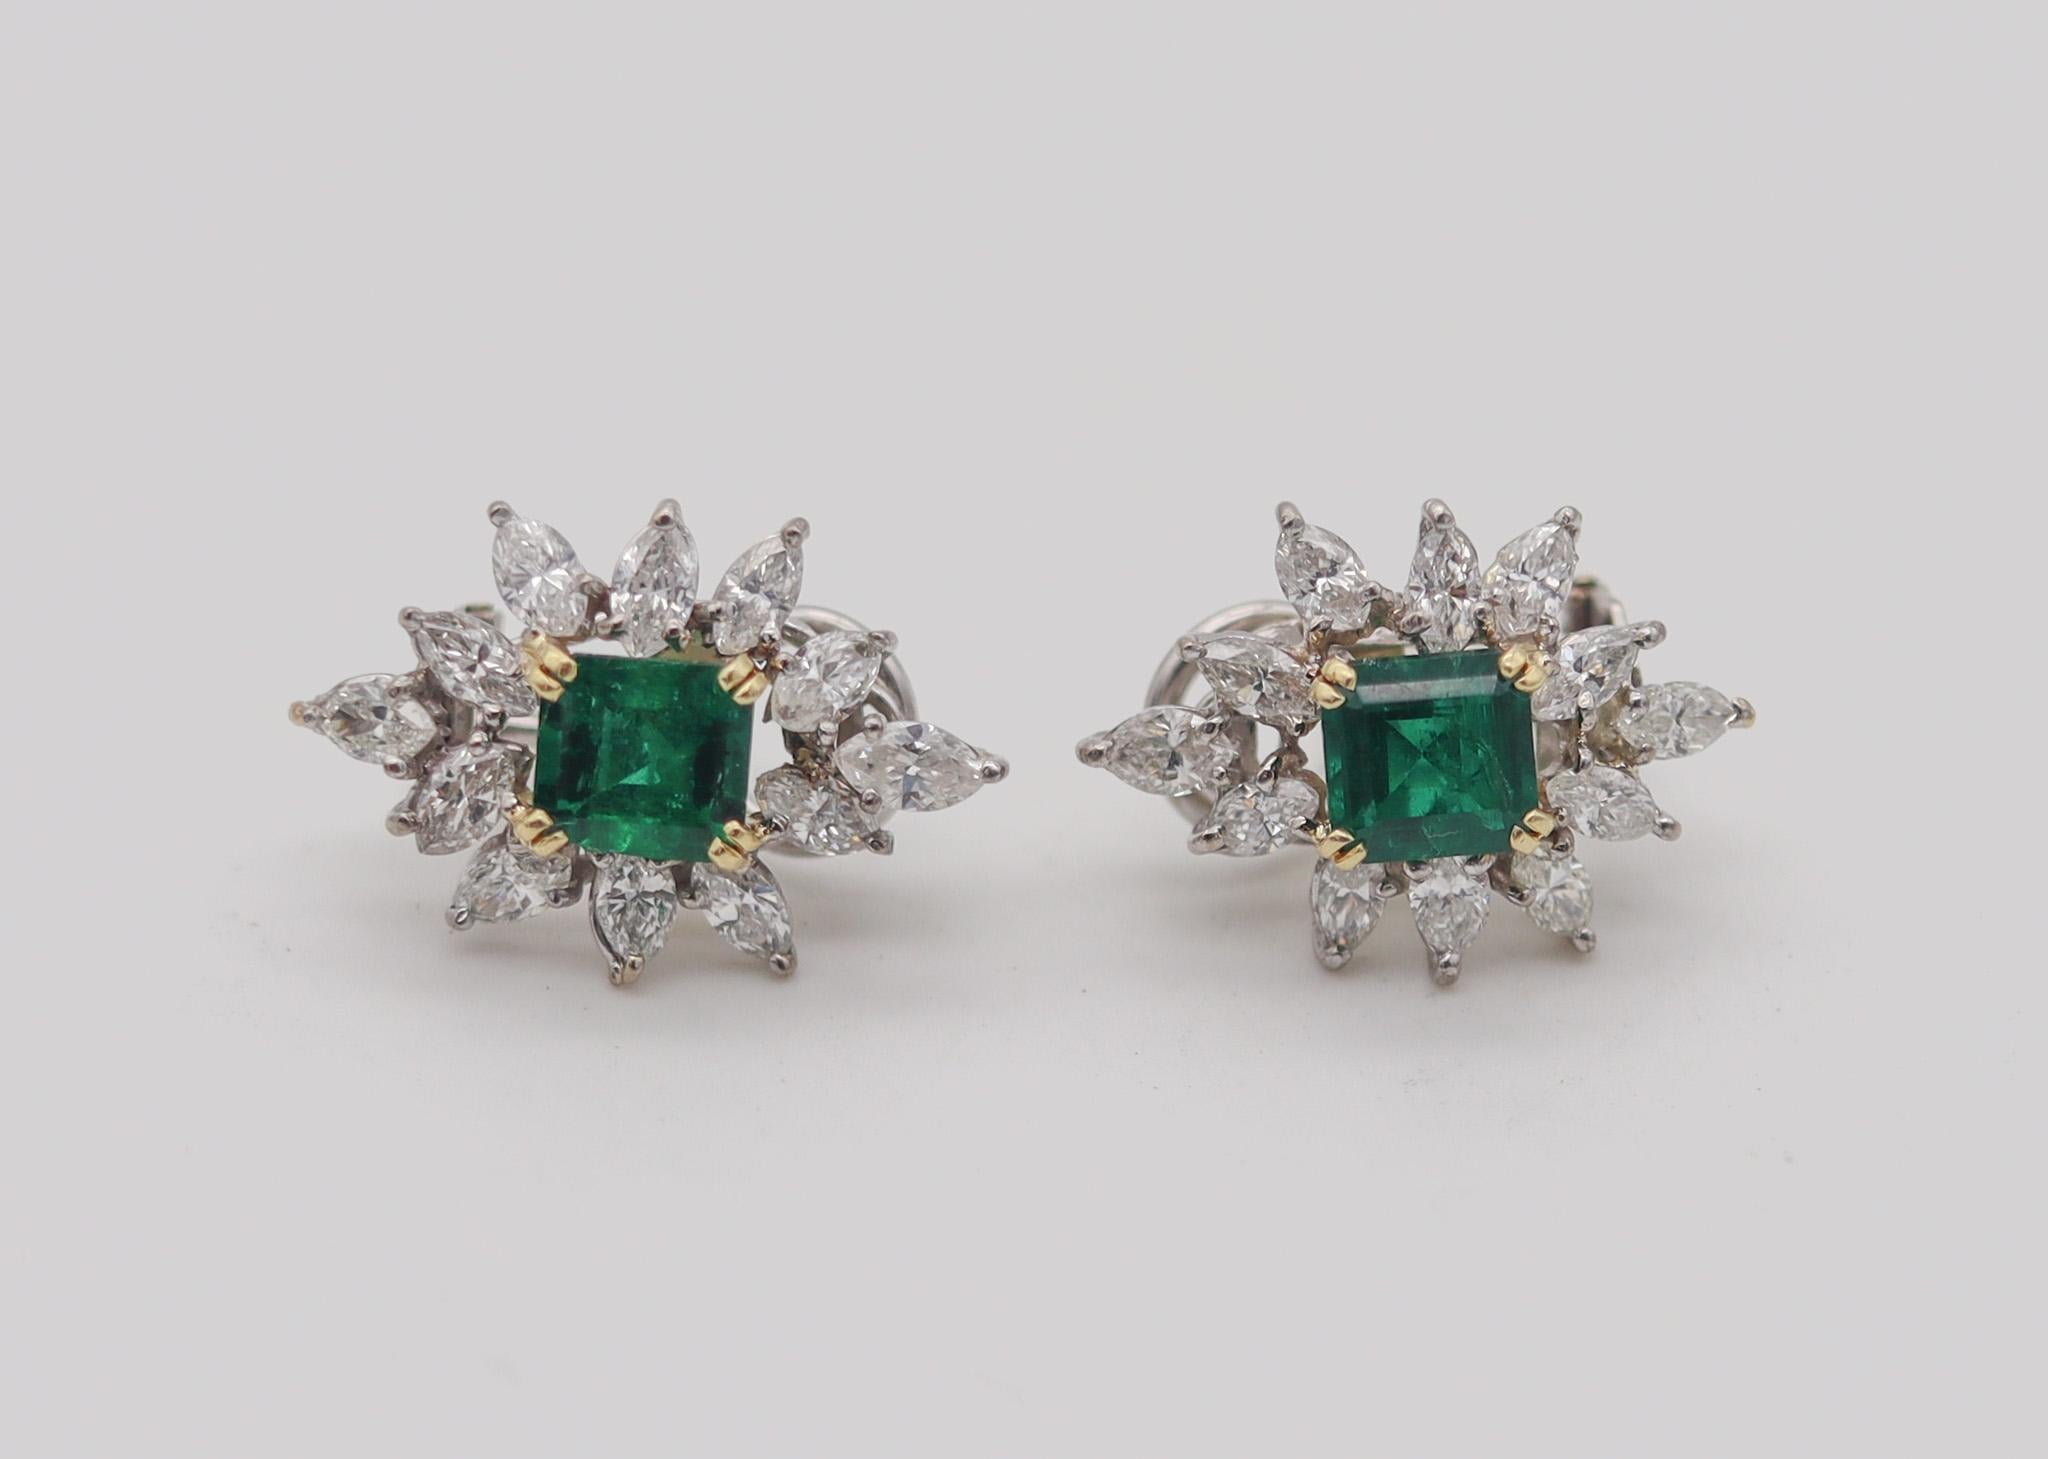 A classic pair of earrings with Emeralds and diamonds.

Very beautiful pair of earrings, crafted with classical patterns in solid white gold of 18 karats and accents of yellow gold in the center for the settings of the emeralds. They are extremely